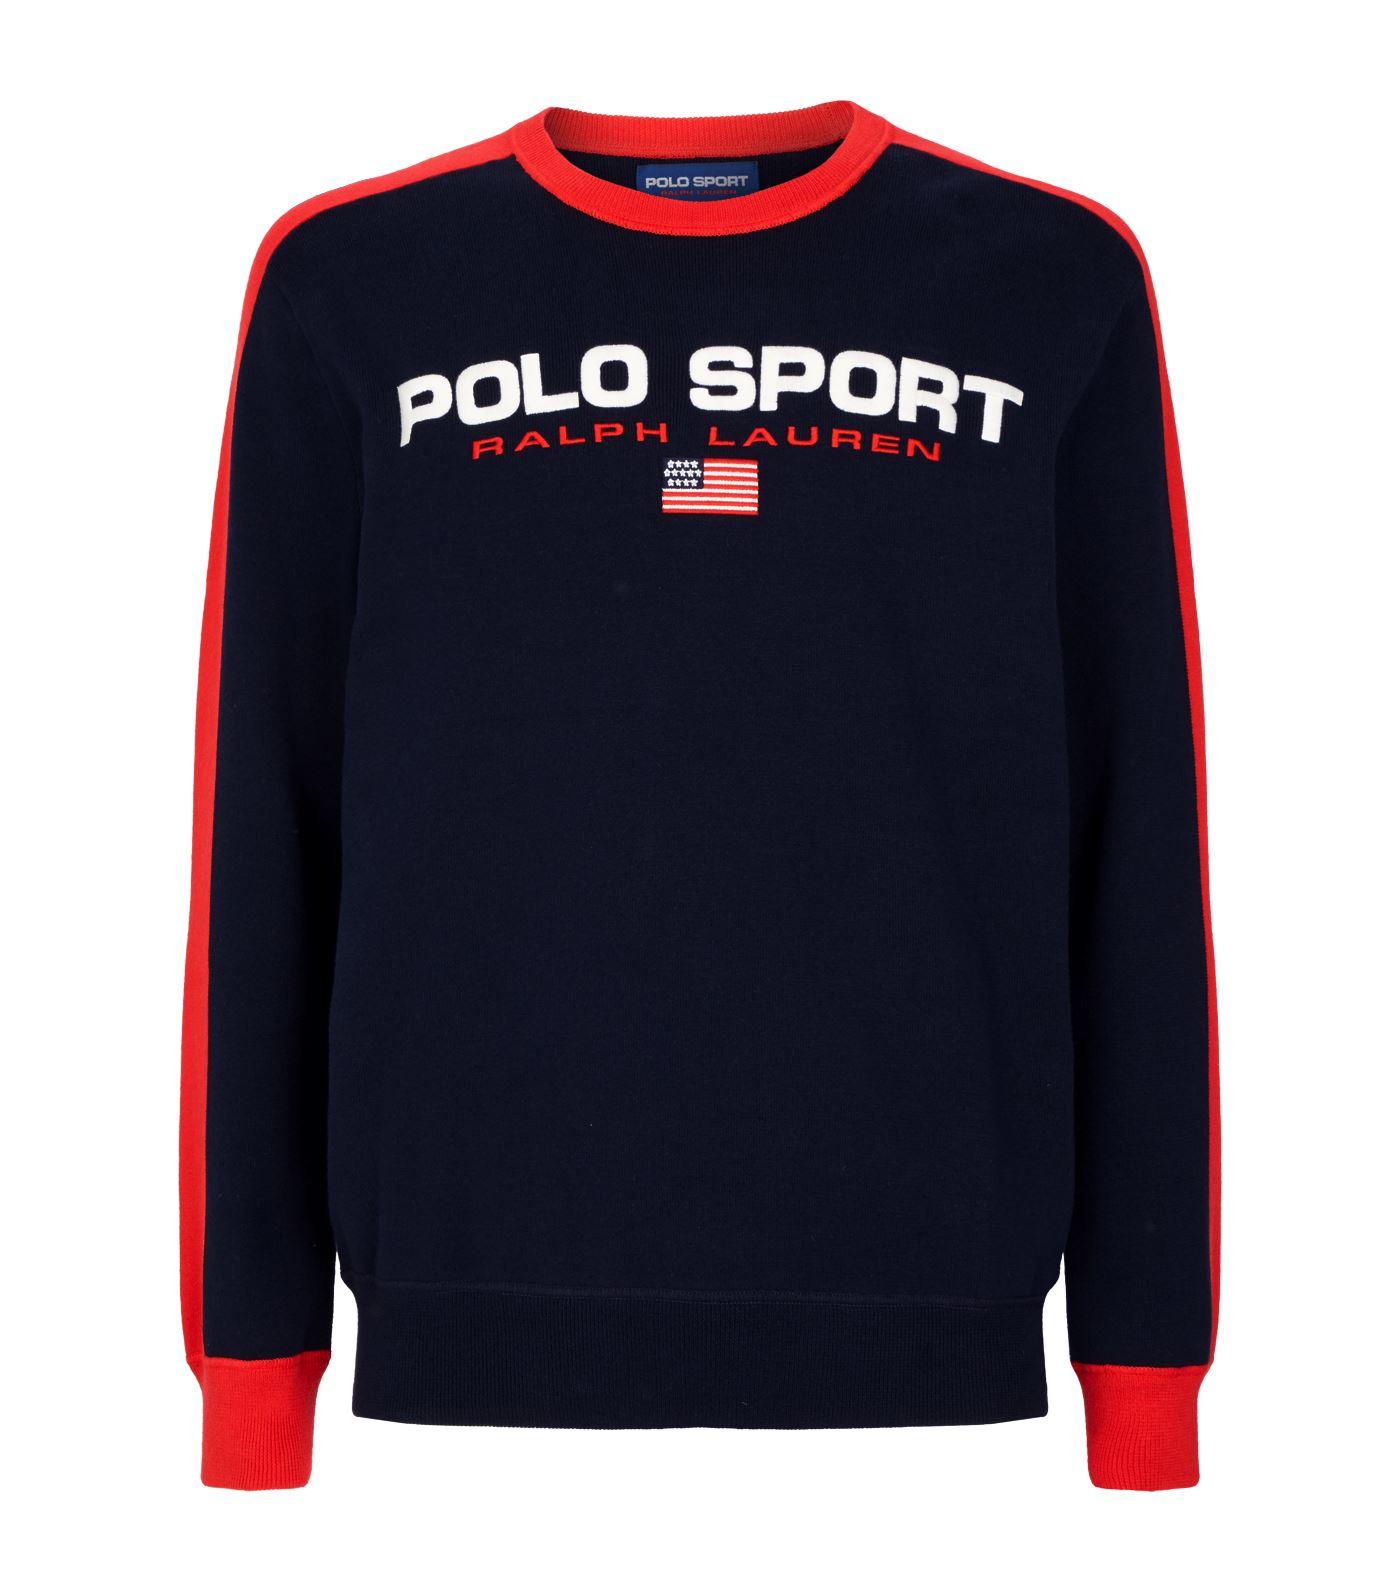 Polo Ralph Lauren Cotton Polo Sport Sweater in Navy (Blue) for Men - Lyst